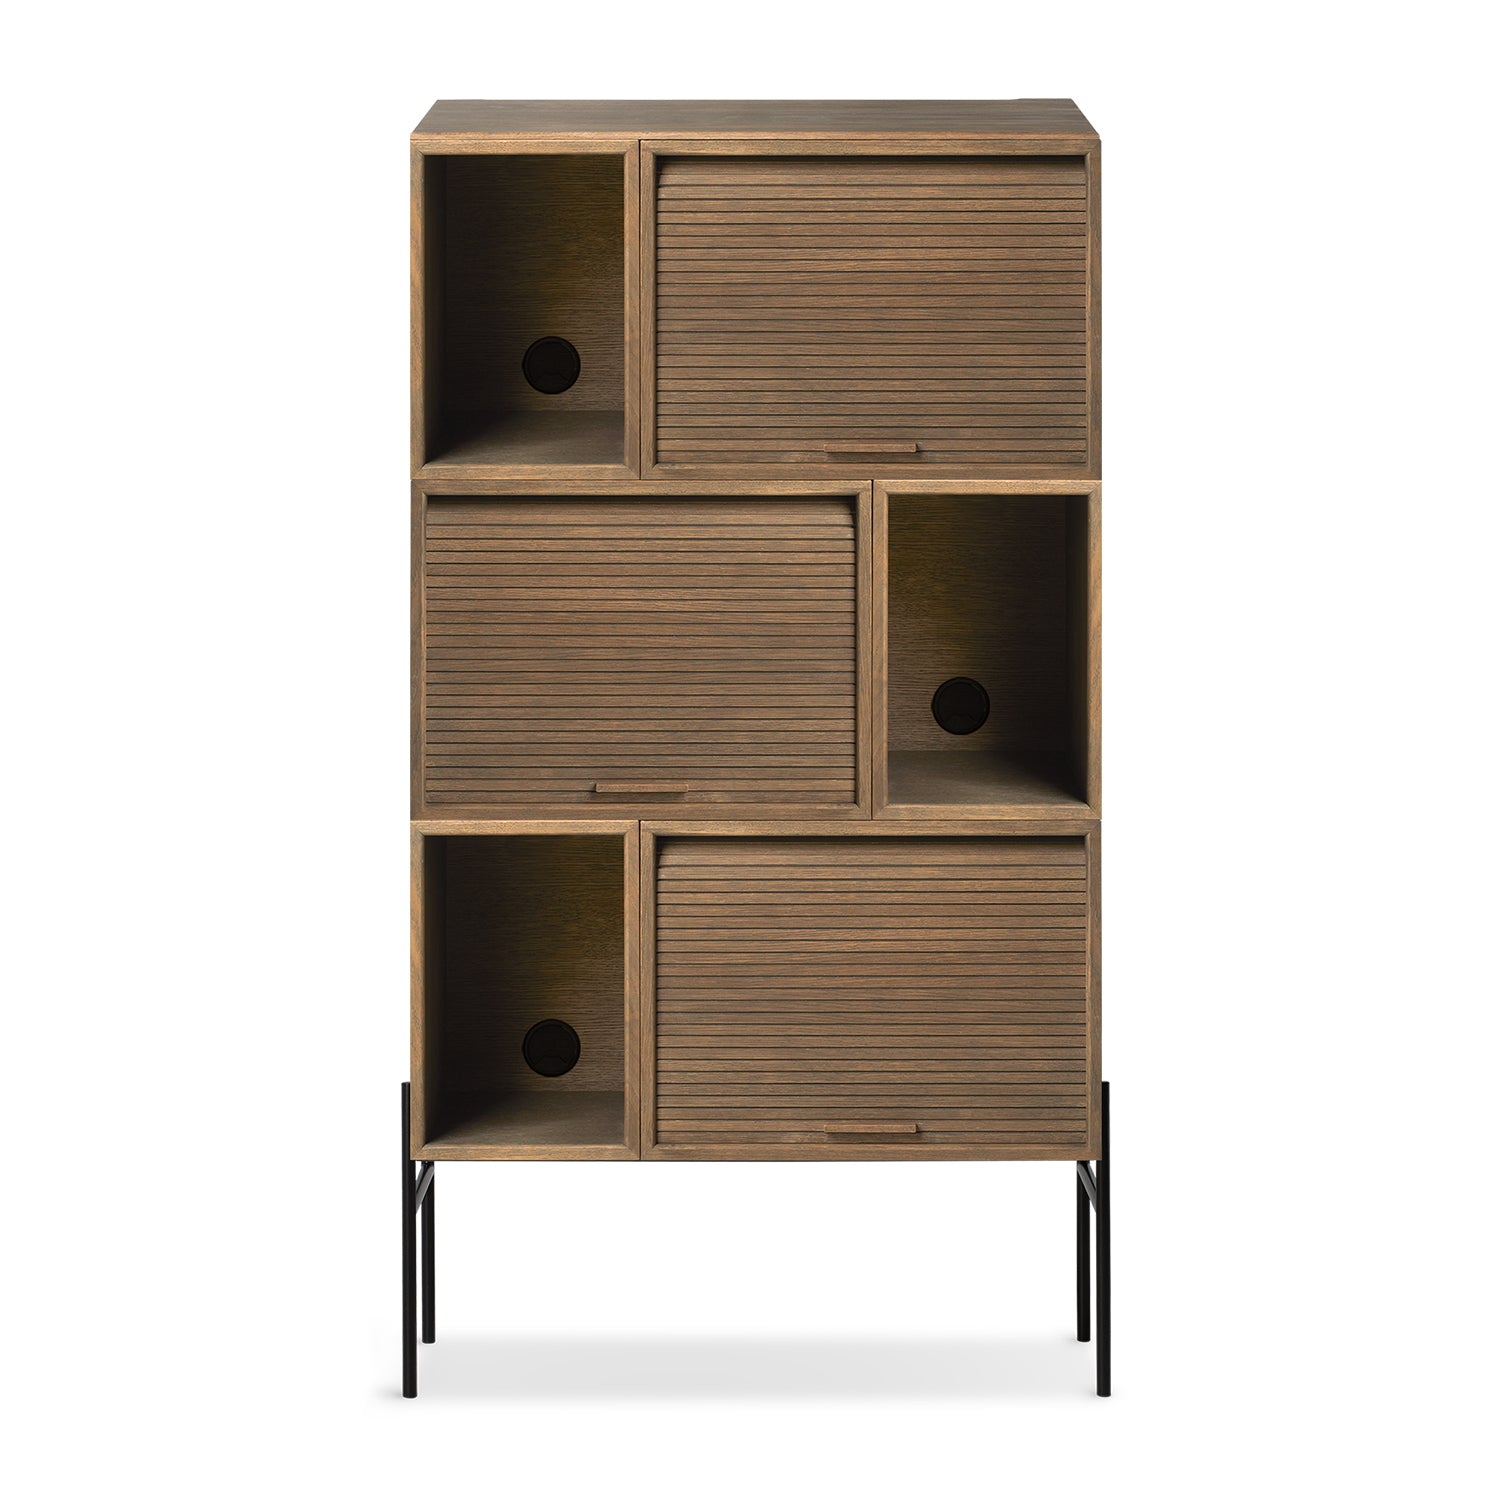 Hifive Tall Cabinet - The Design Choice